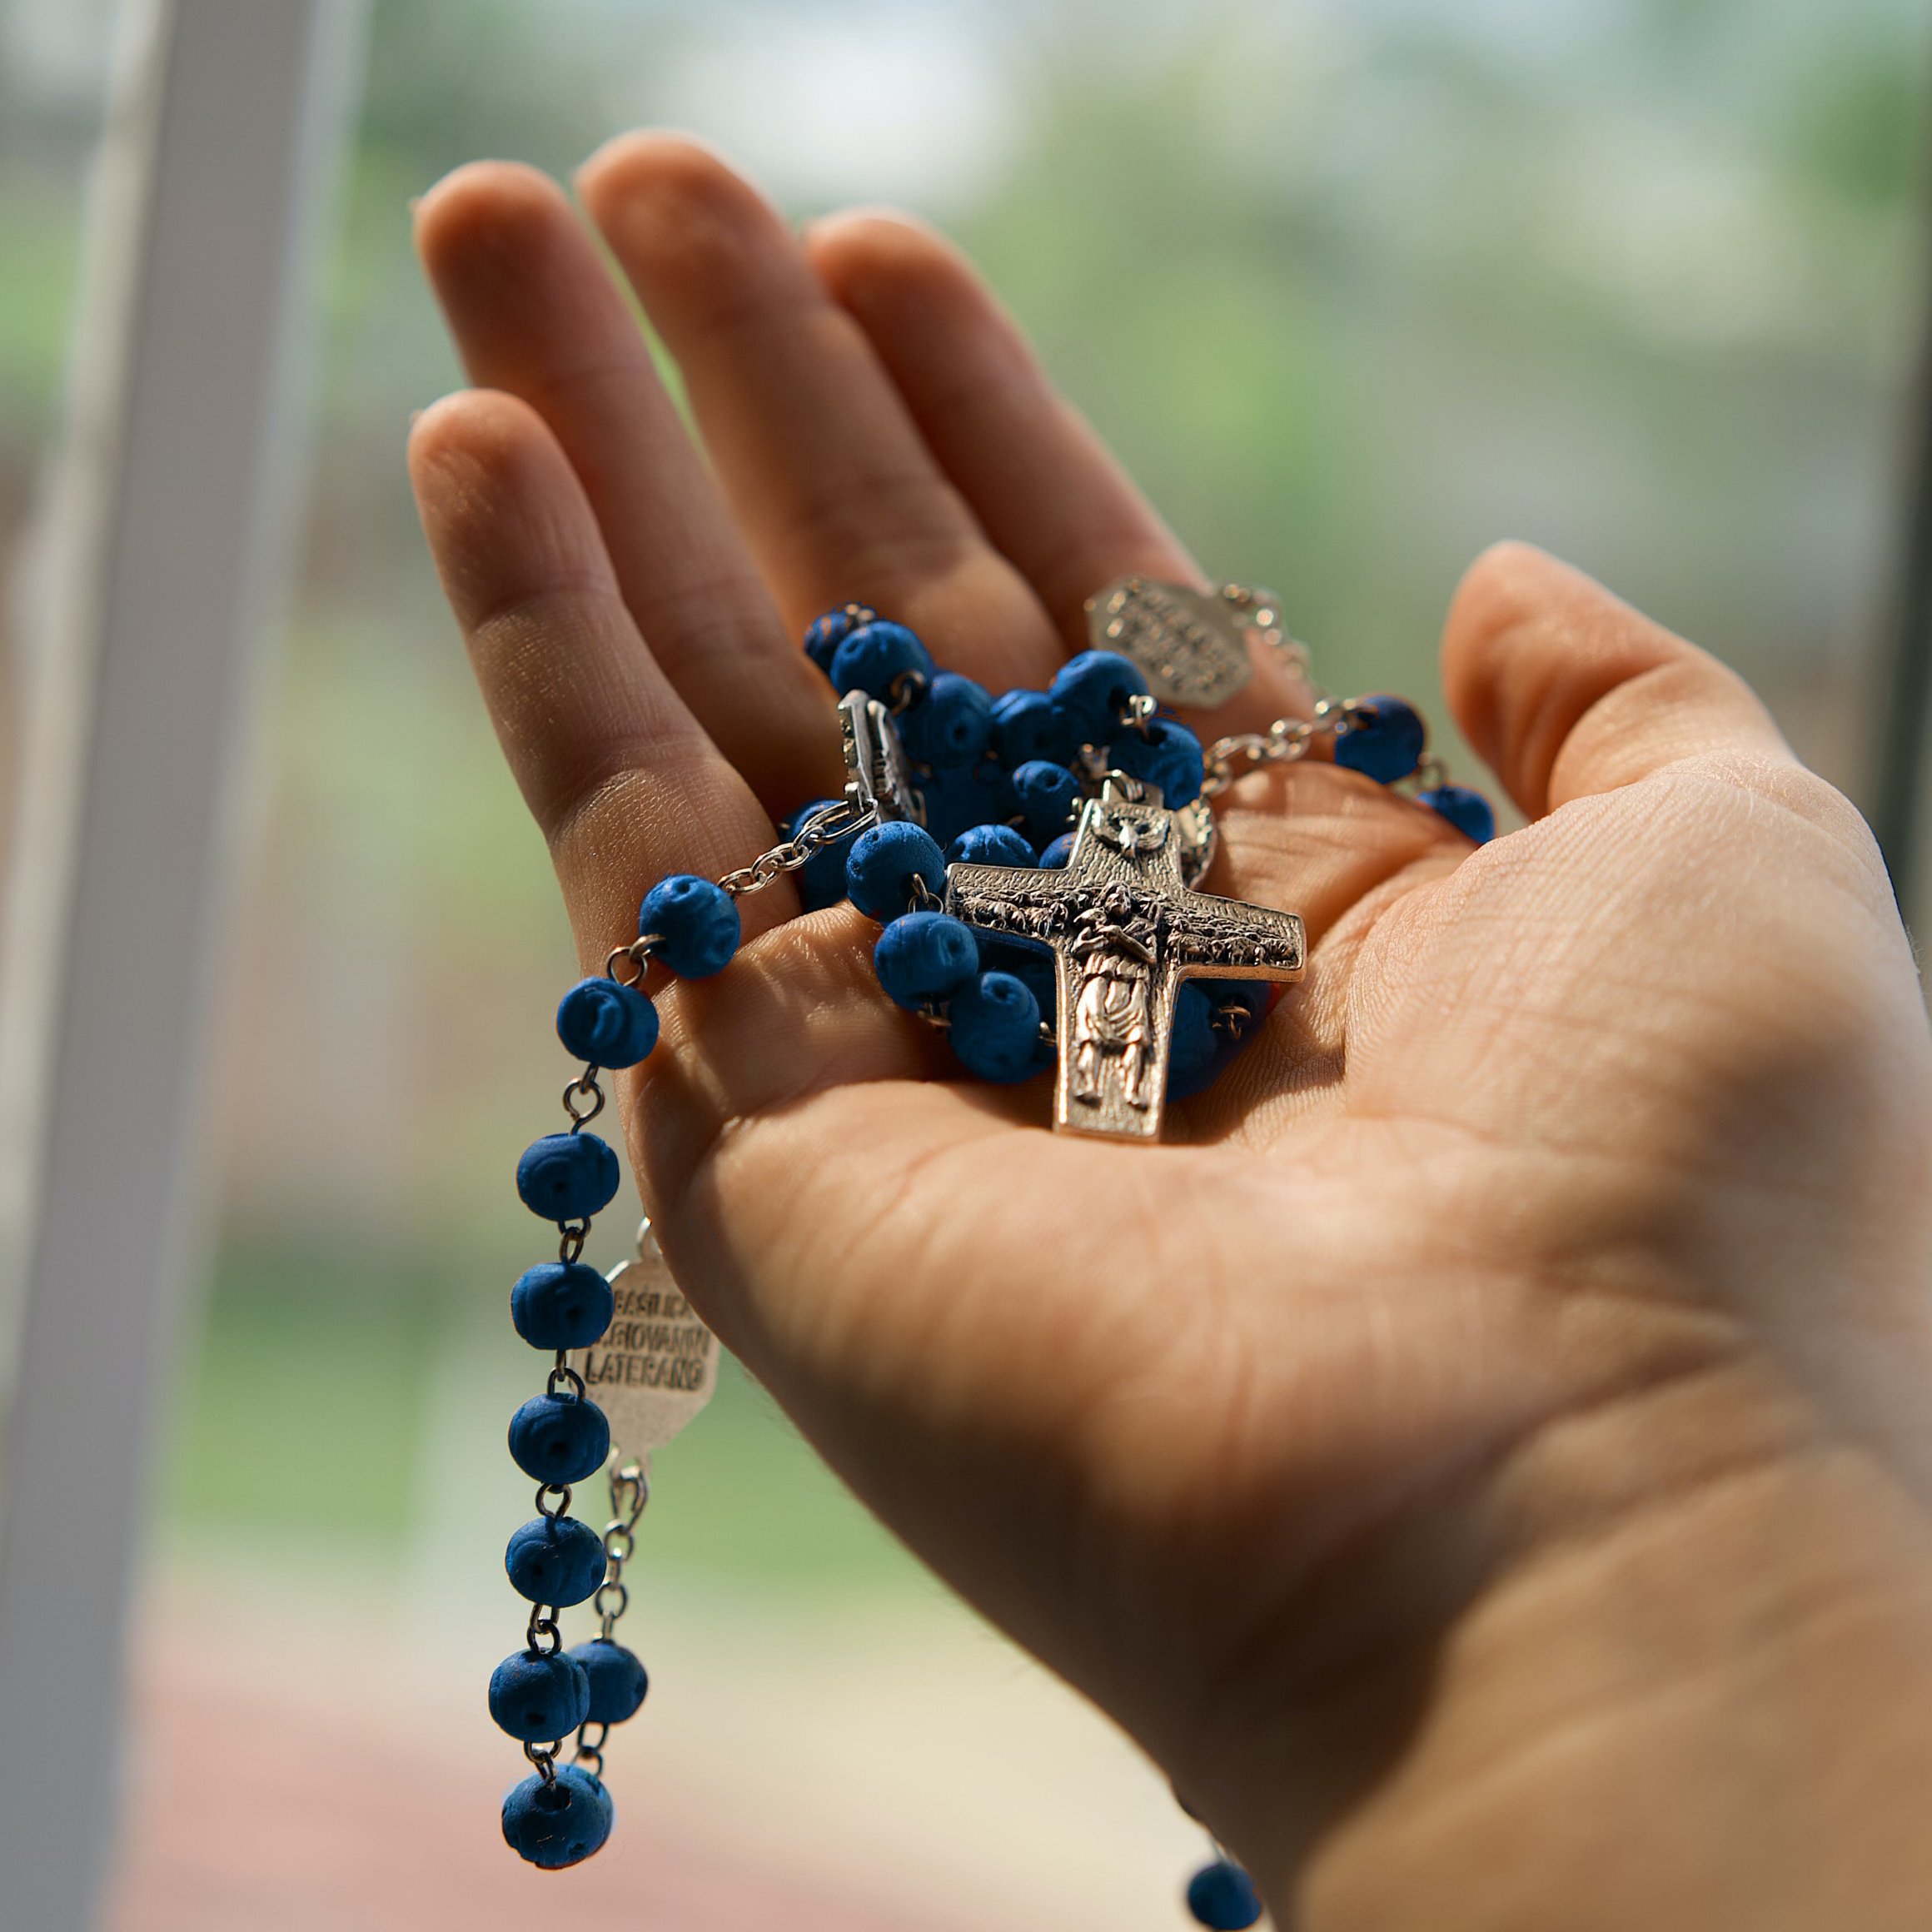 Hand Open Holding Rosary